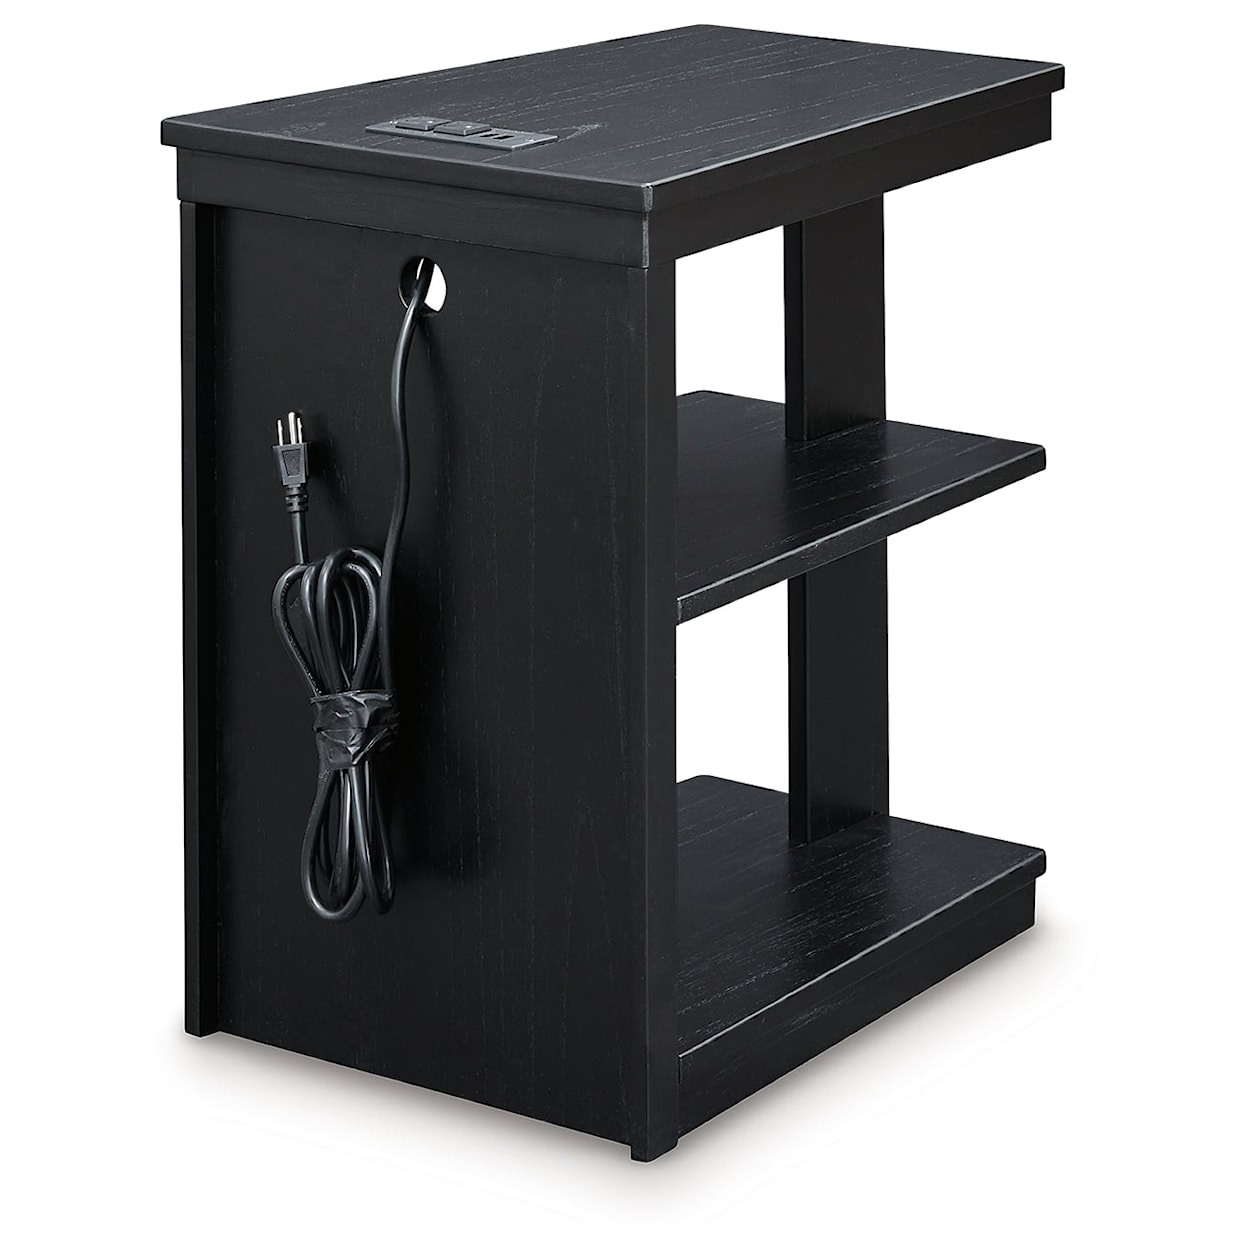 Signature Design by Ashley Winbardi Chairside End Table